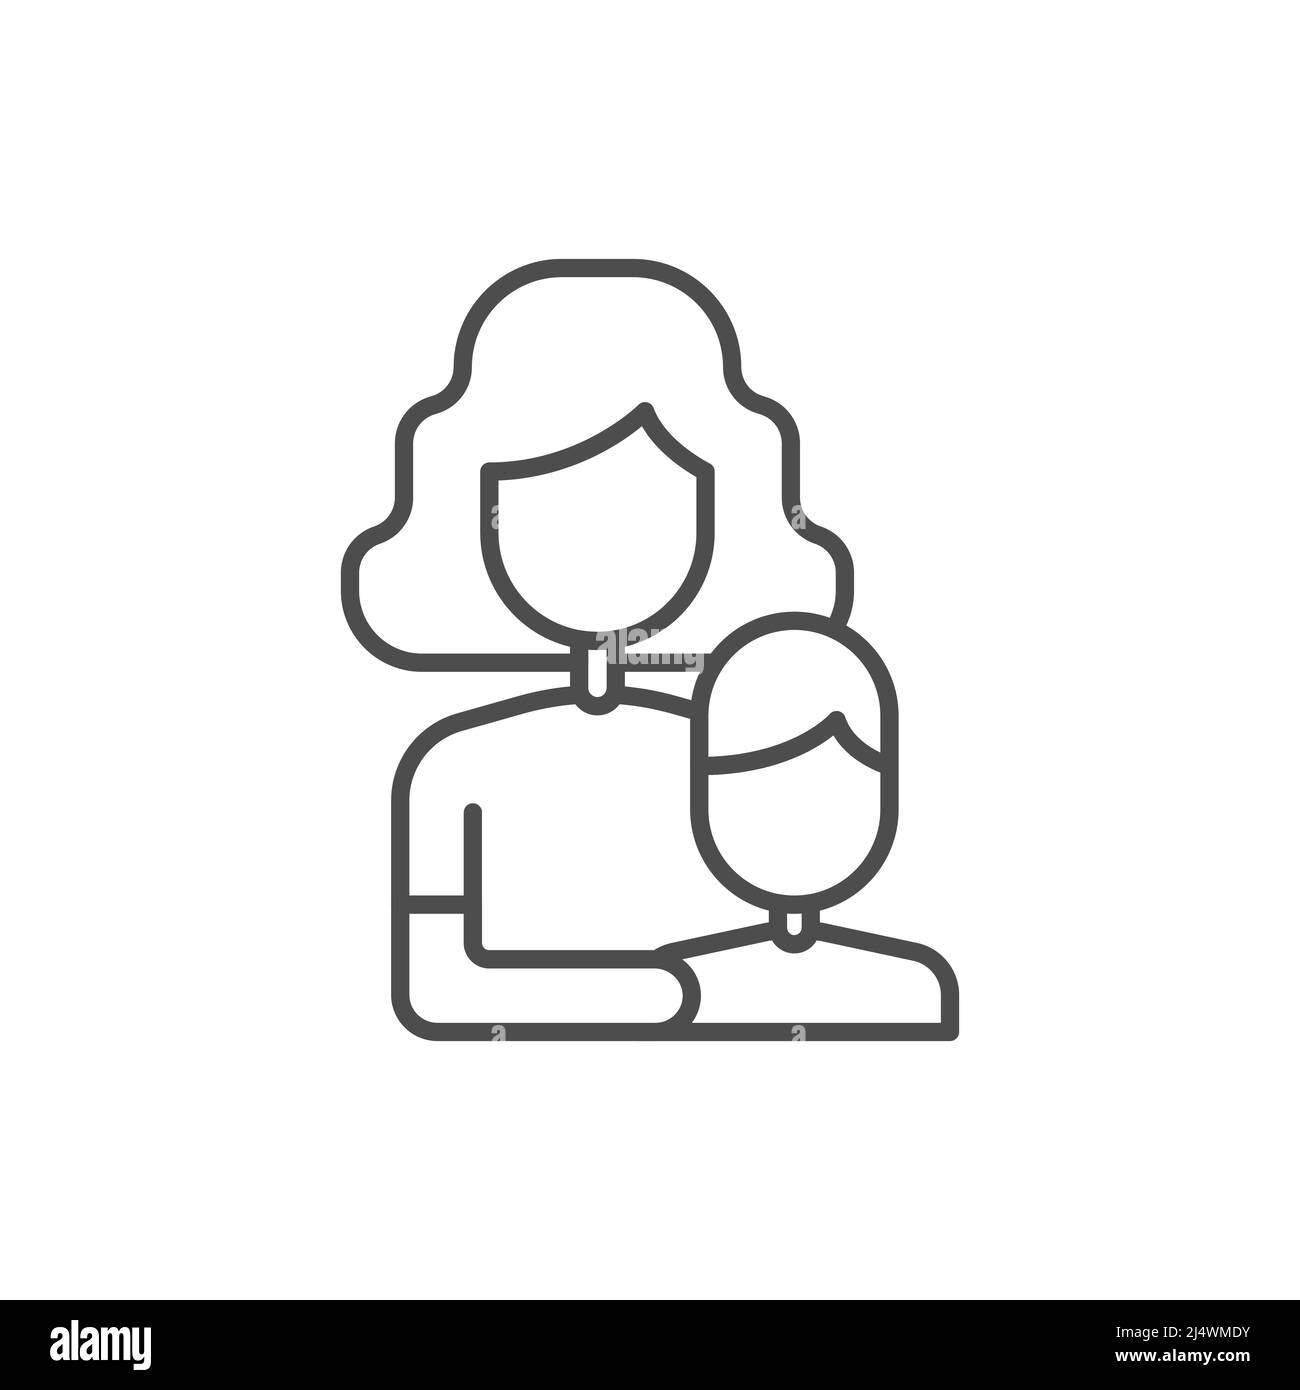 Mother Super Mom Icon Set In Thin Line Style Stock Illustration